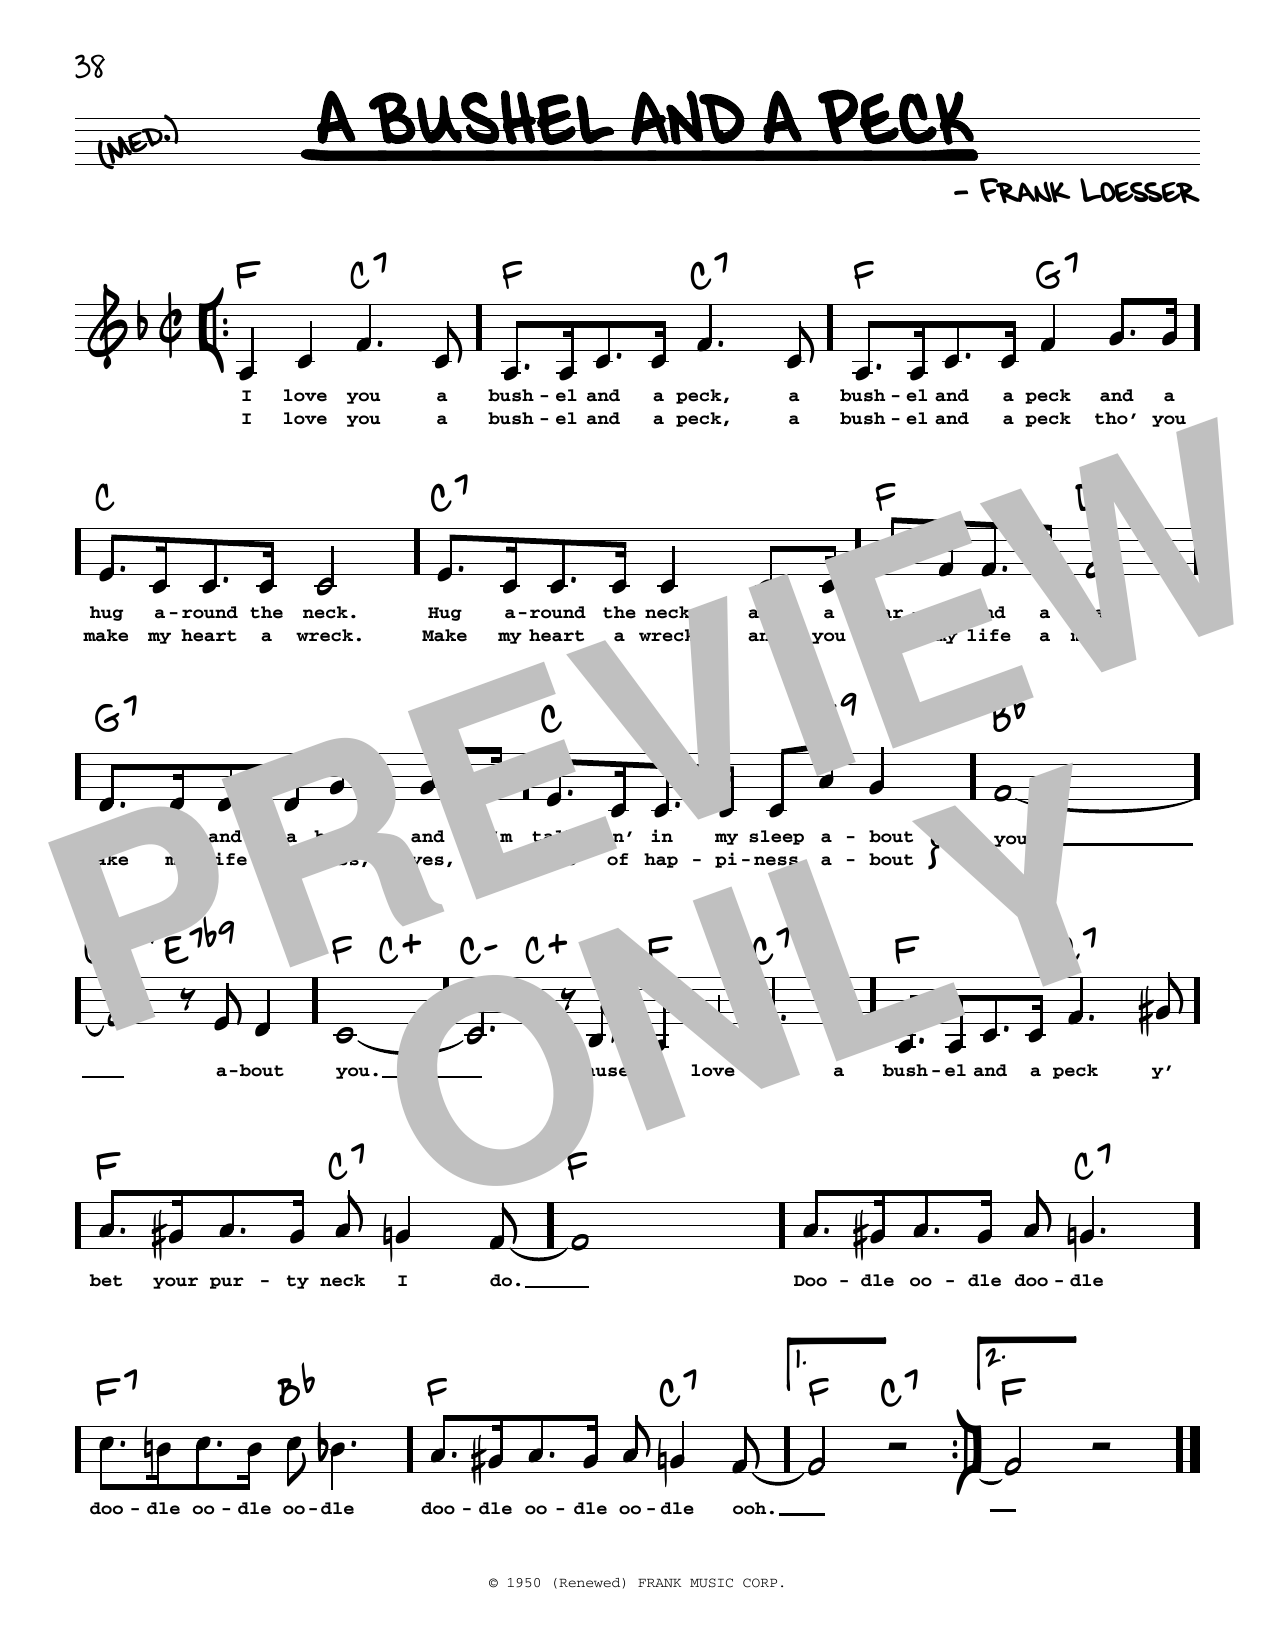 Frank Loesser A Bushel And A Peck (Low Voice) sheet music notes printable PDF score